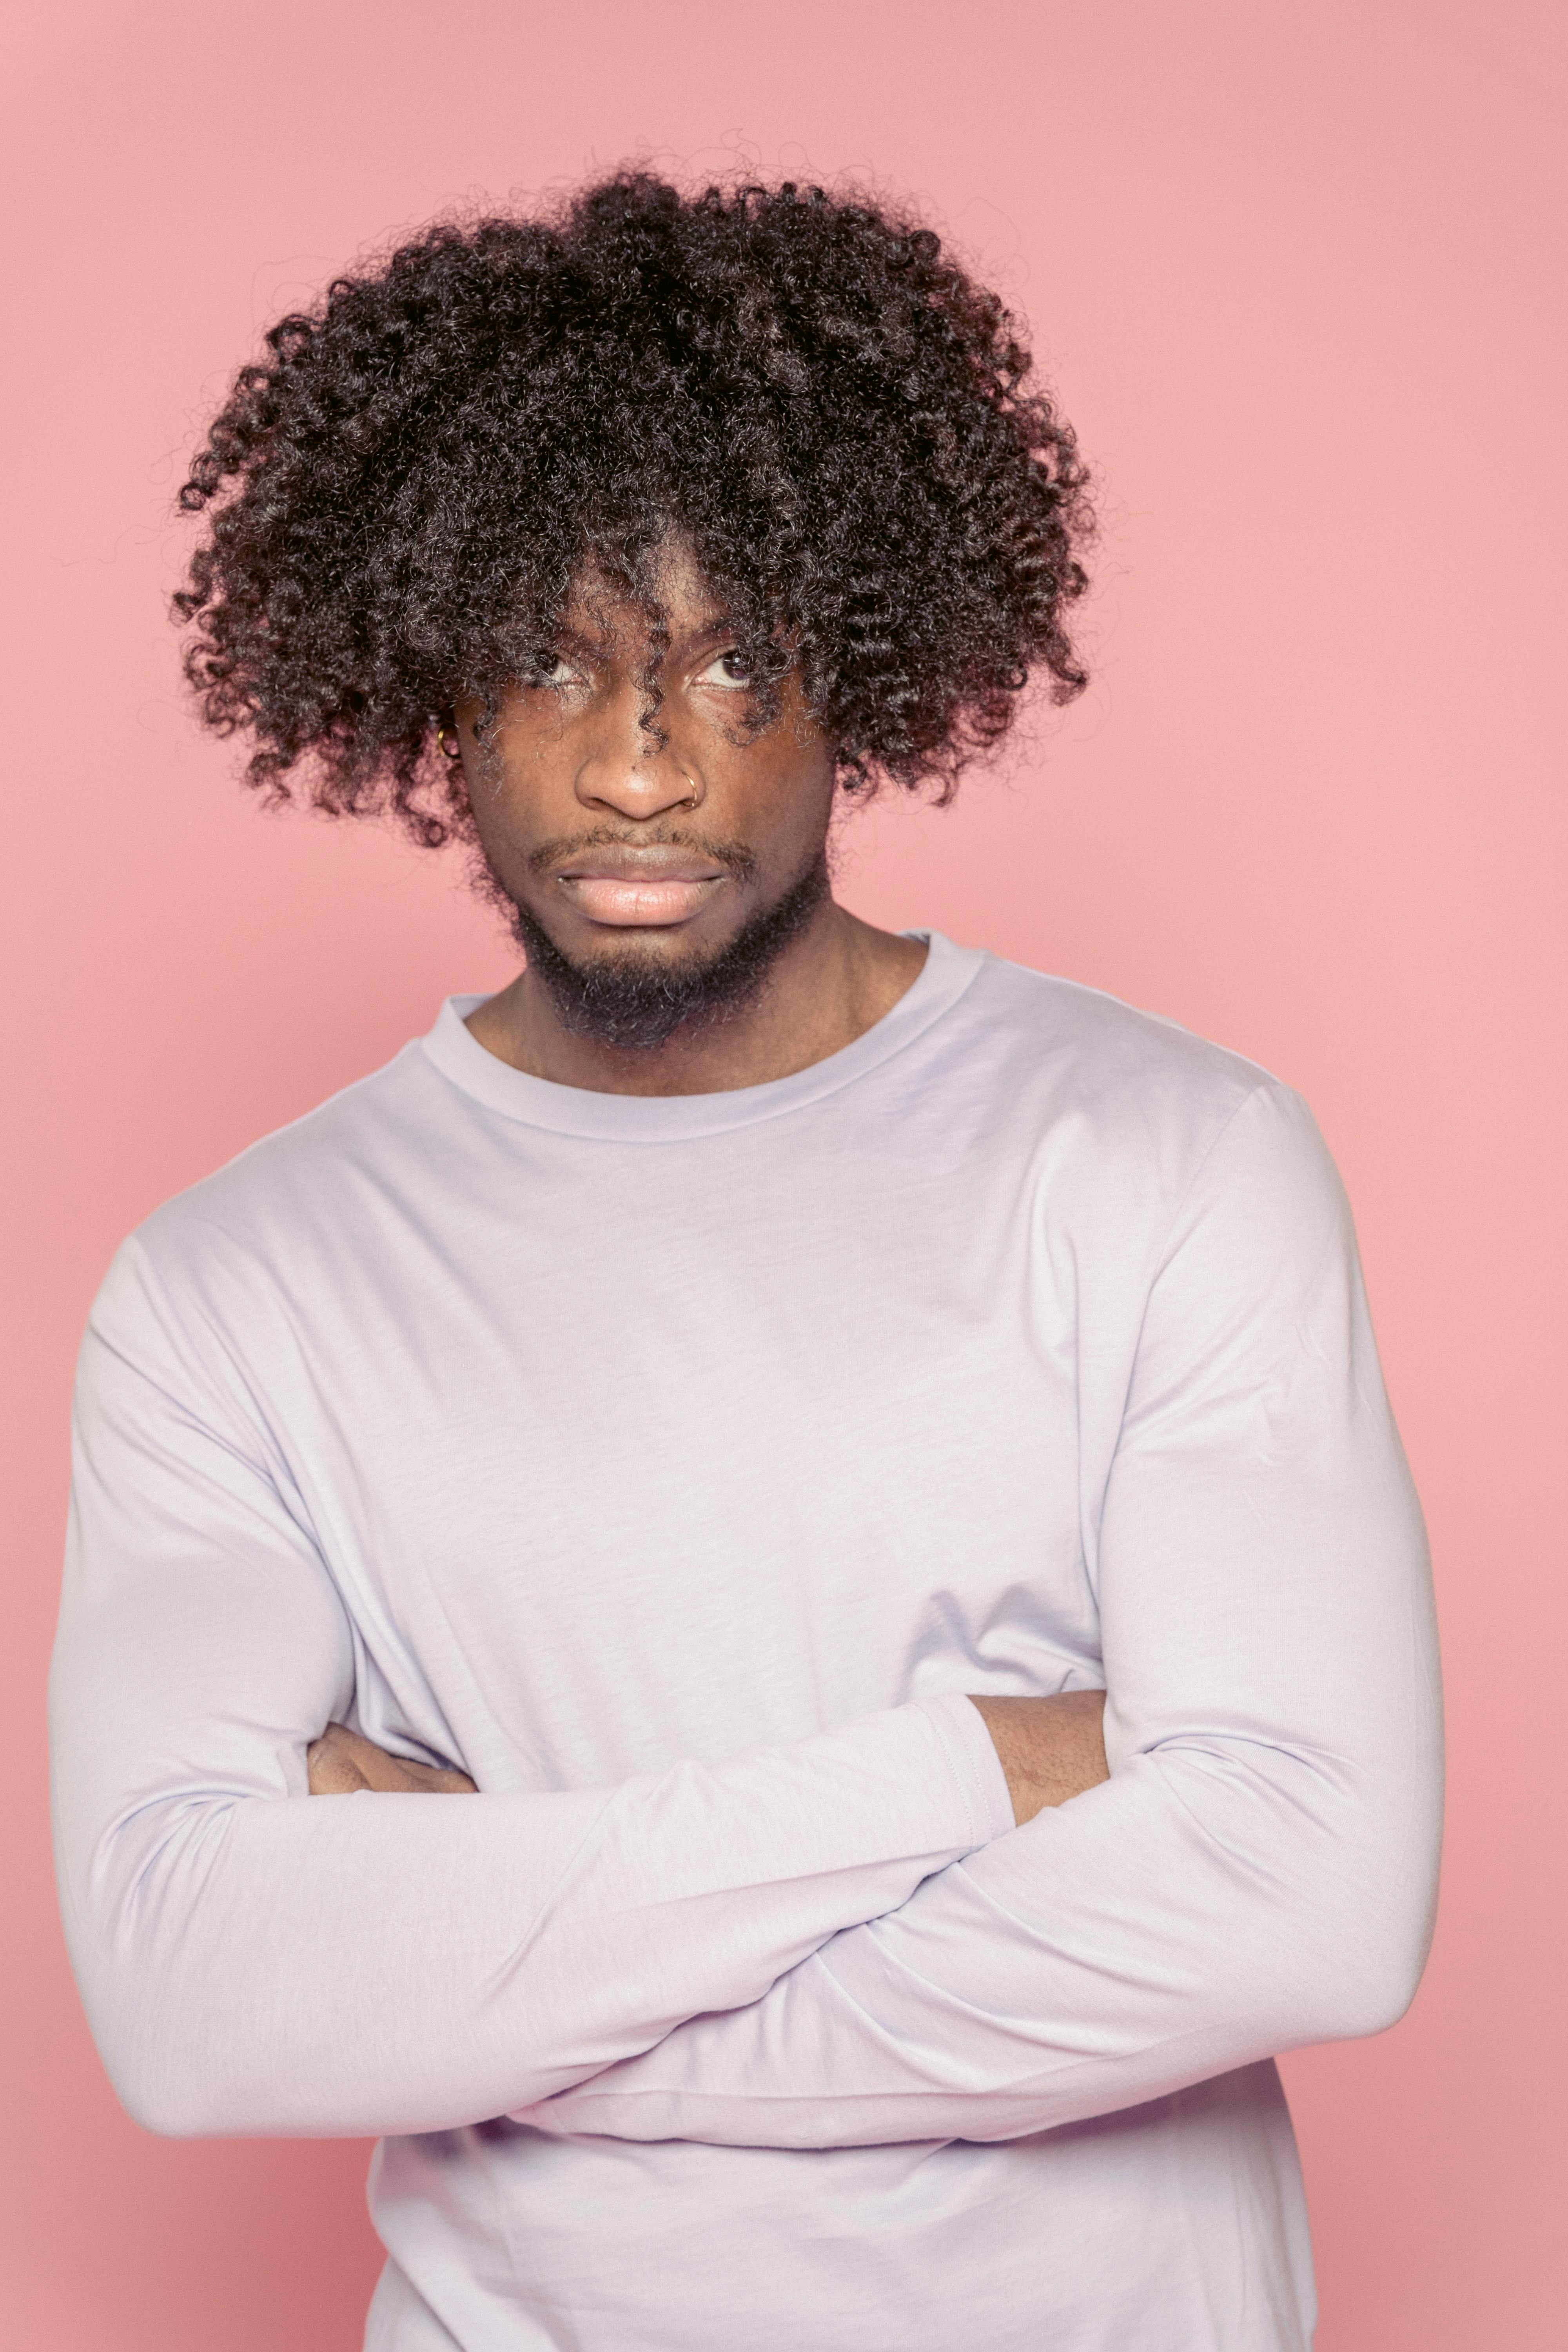 Top Tips for Barbers Cutting and Styling Afro Hair - Modern Barber